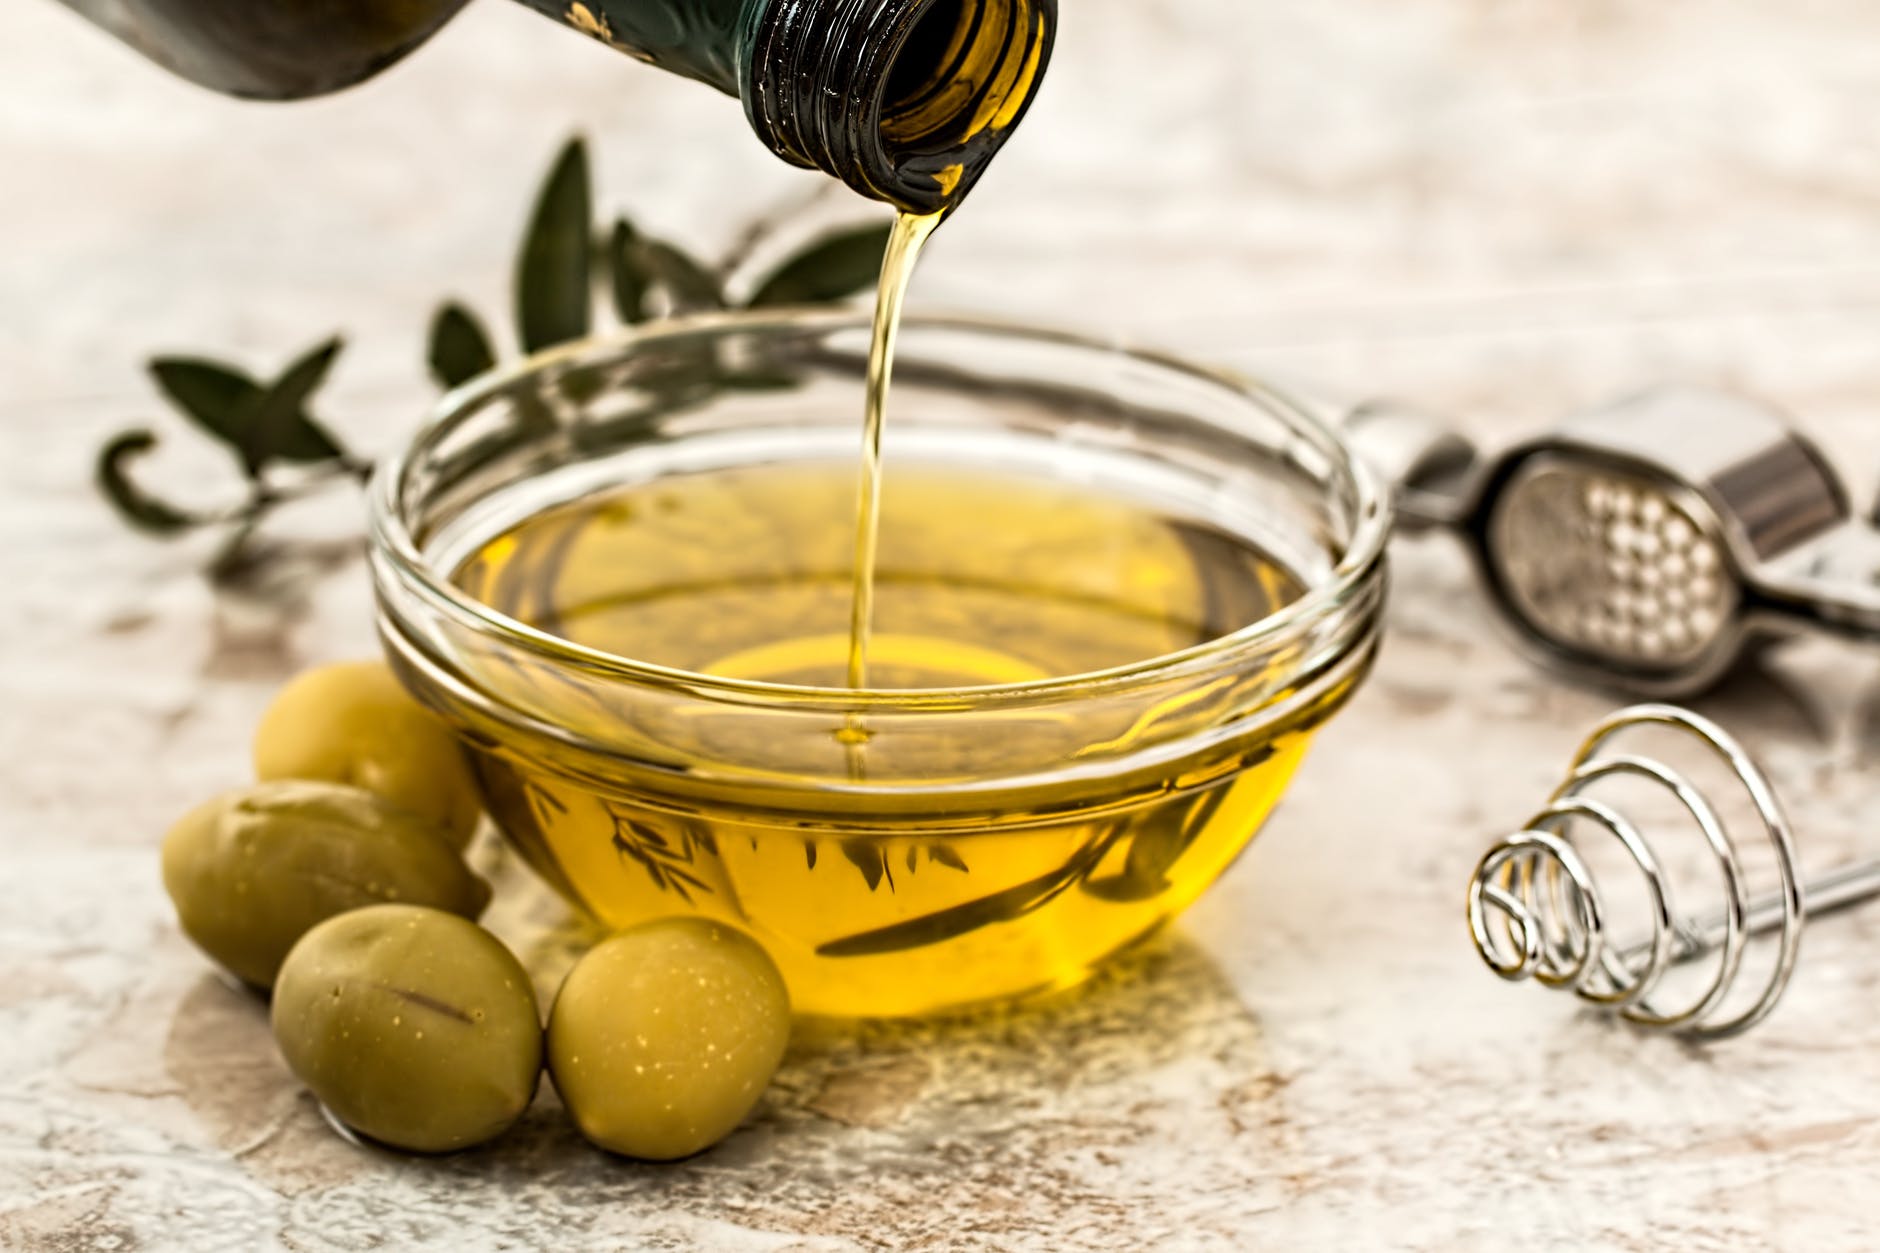 superfoods for weight loss - Olive Oil